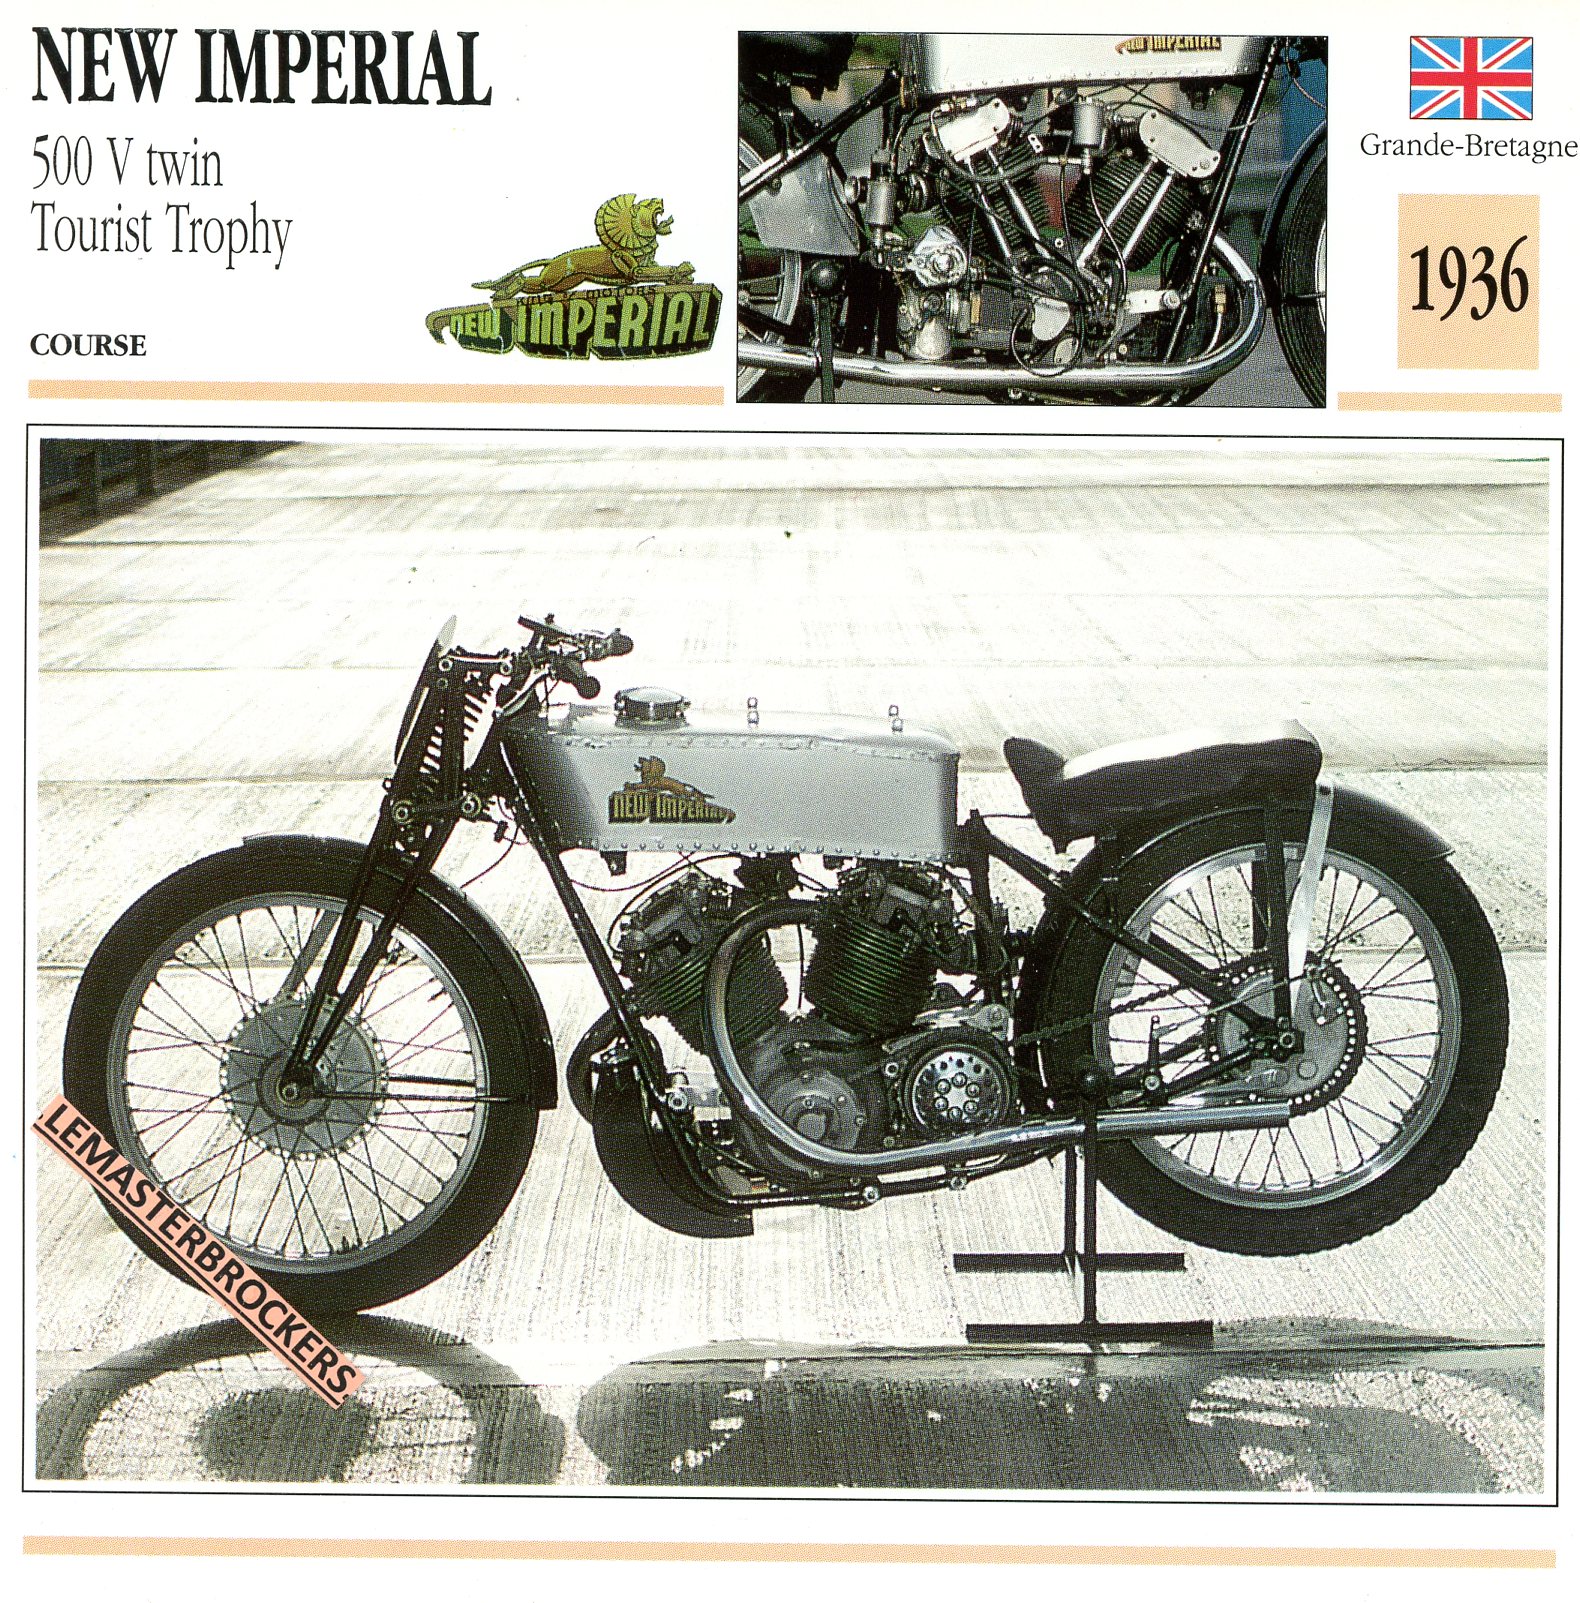 NEW-IMPERIAL-500-V-TWIN-TOURIST-TROPHY-1936 -FICHE-MOTO-LEMASTERBROCKERS